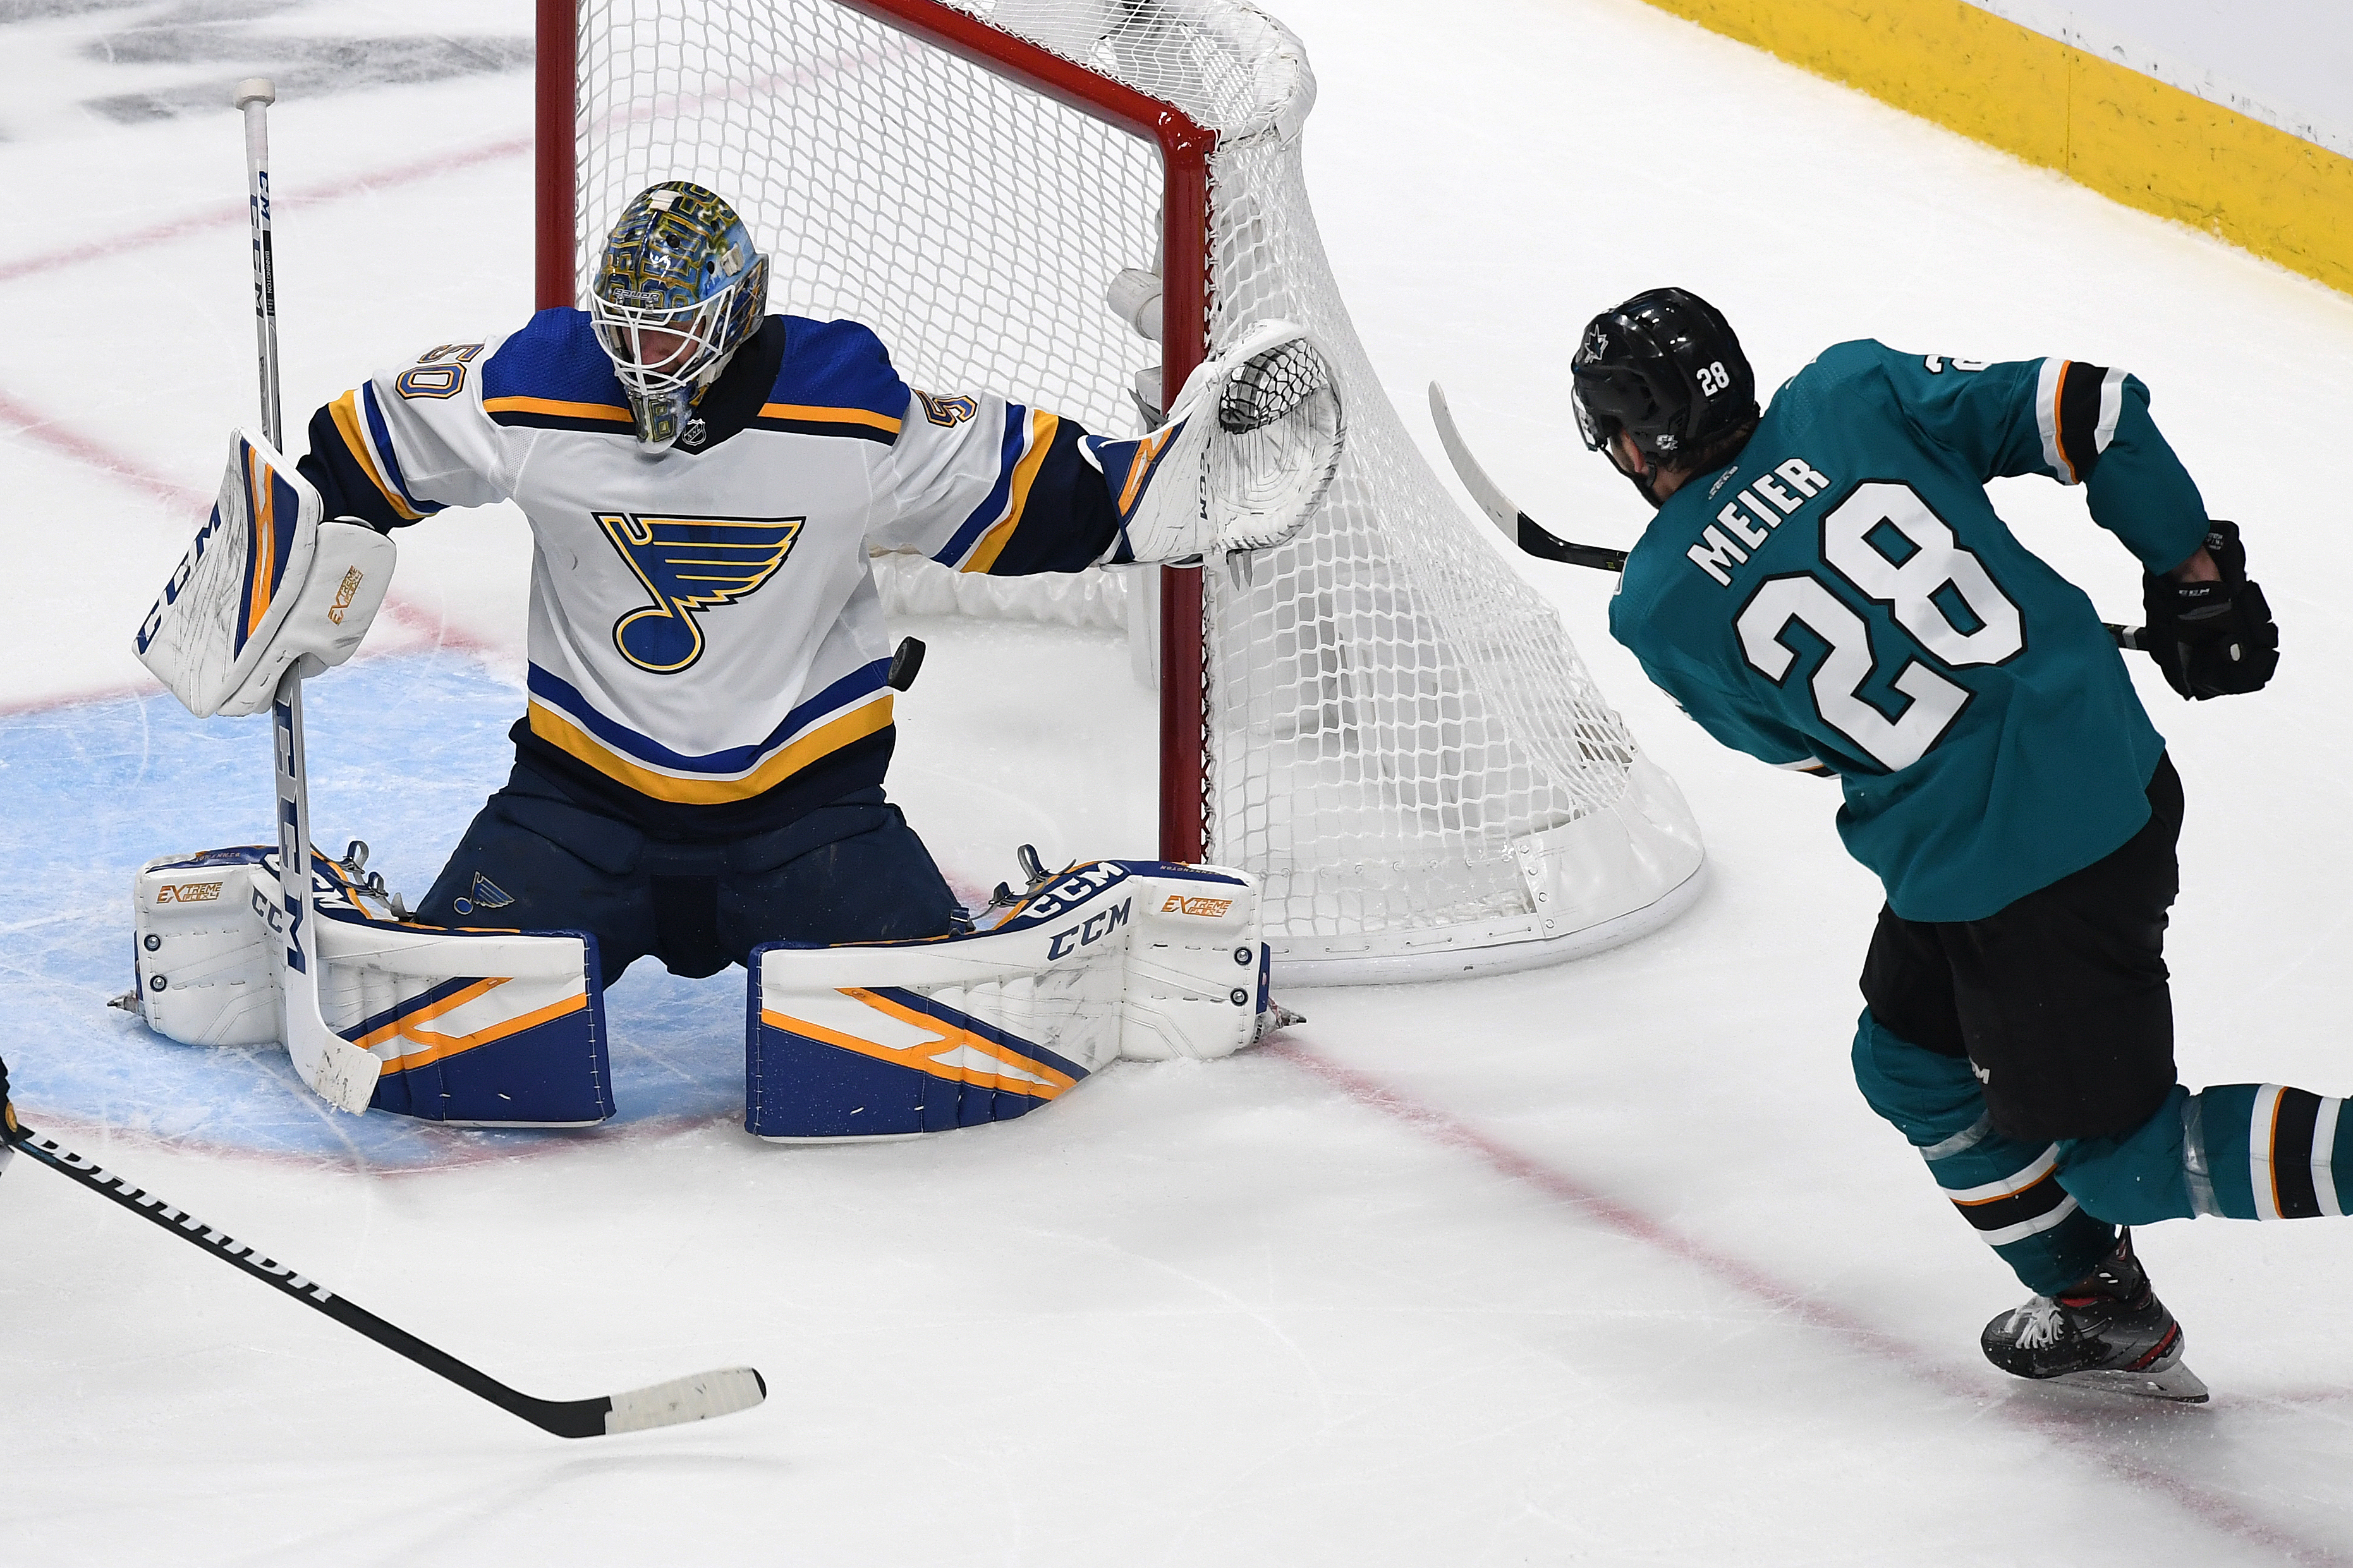 Jordan Binnington #50 of the St. Louis Blues makes a save against Timo Meier #28 of the San Jose Sharks in Game 2 of the Western Conference Final during the 2019 NHL Stanley Cup Playoffs at SAP Center on May 13, 2019 in San Jose, California.